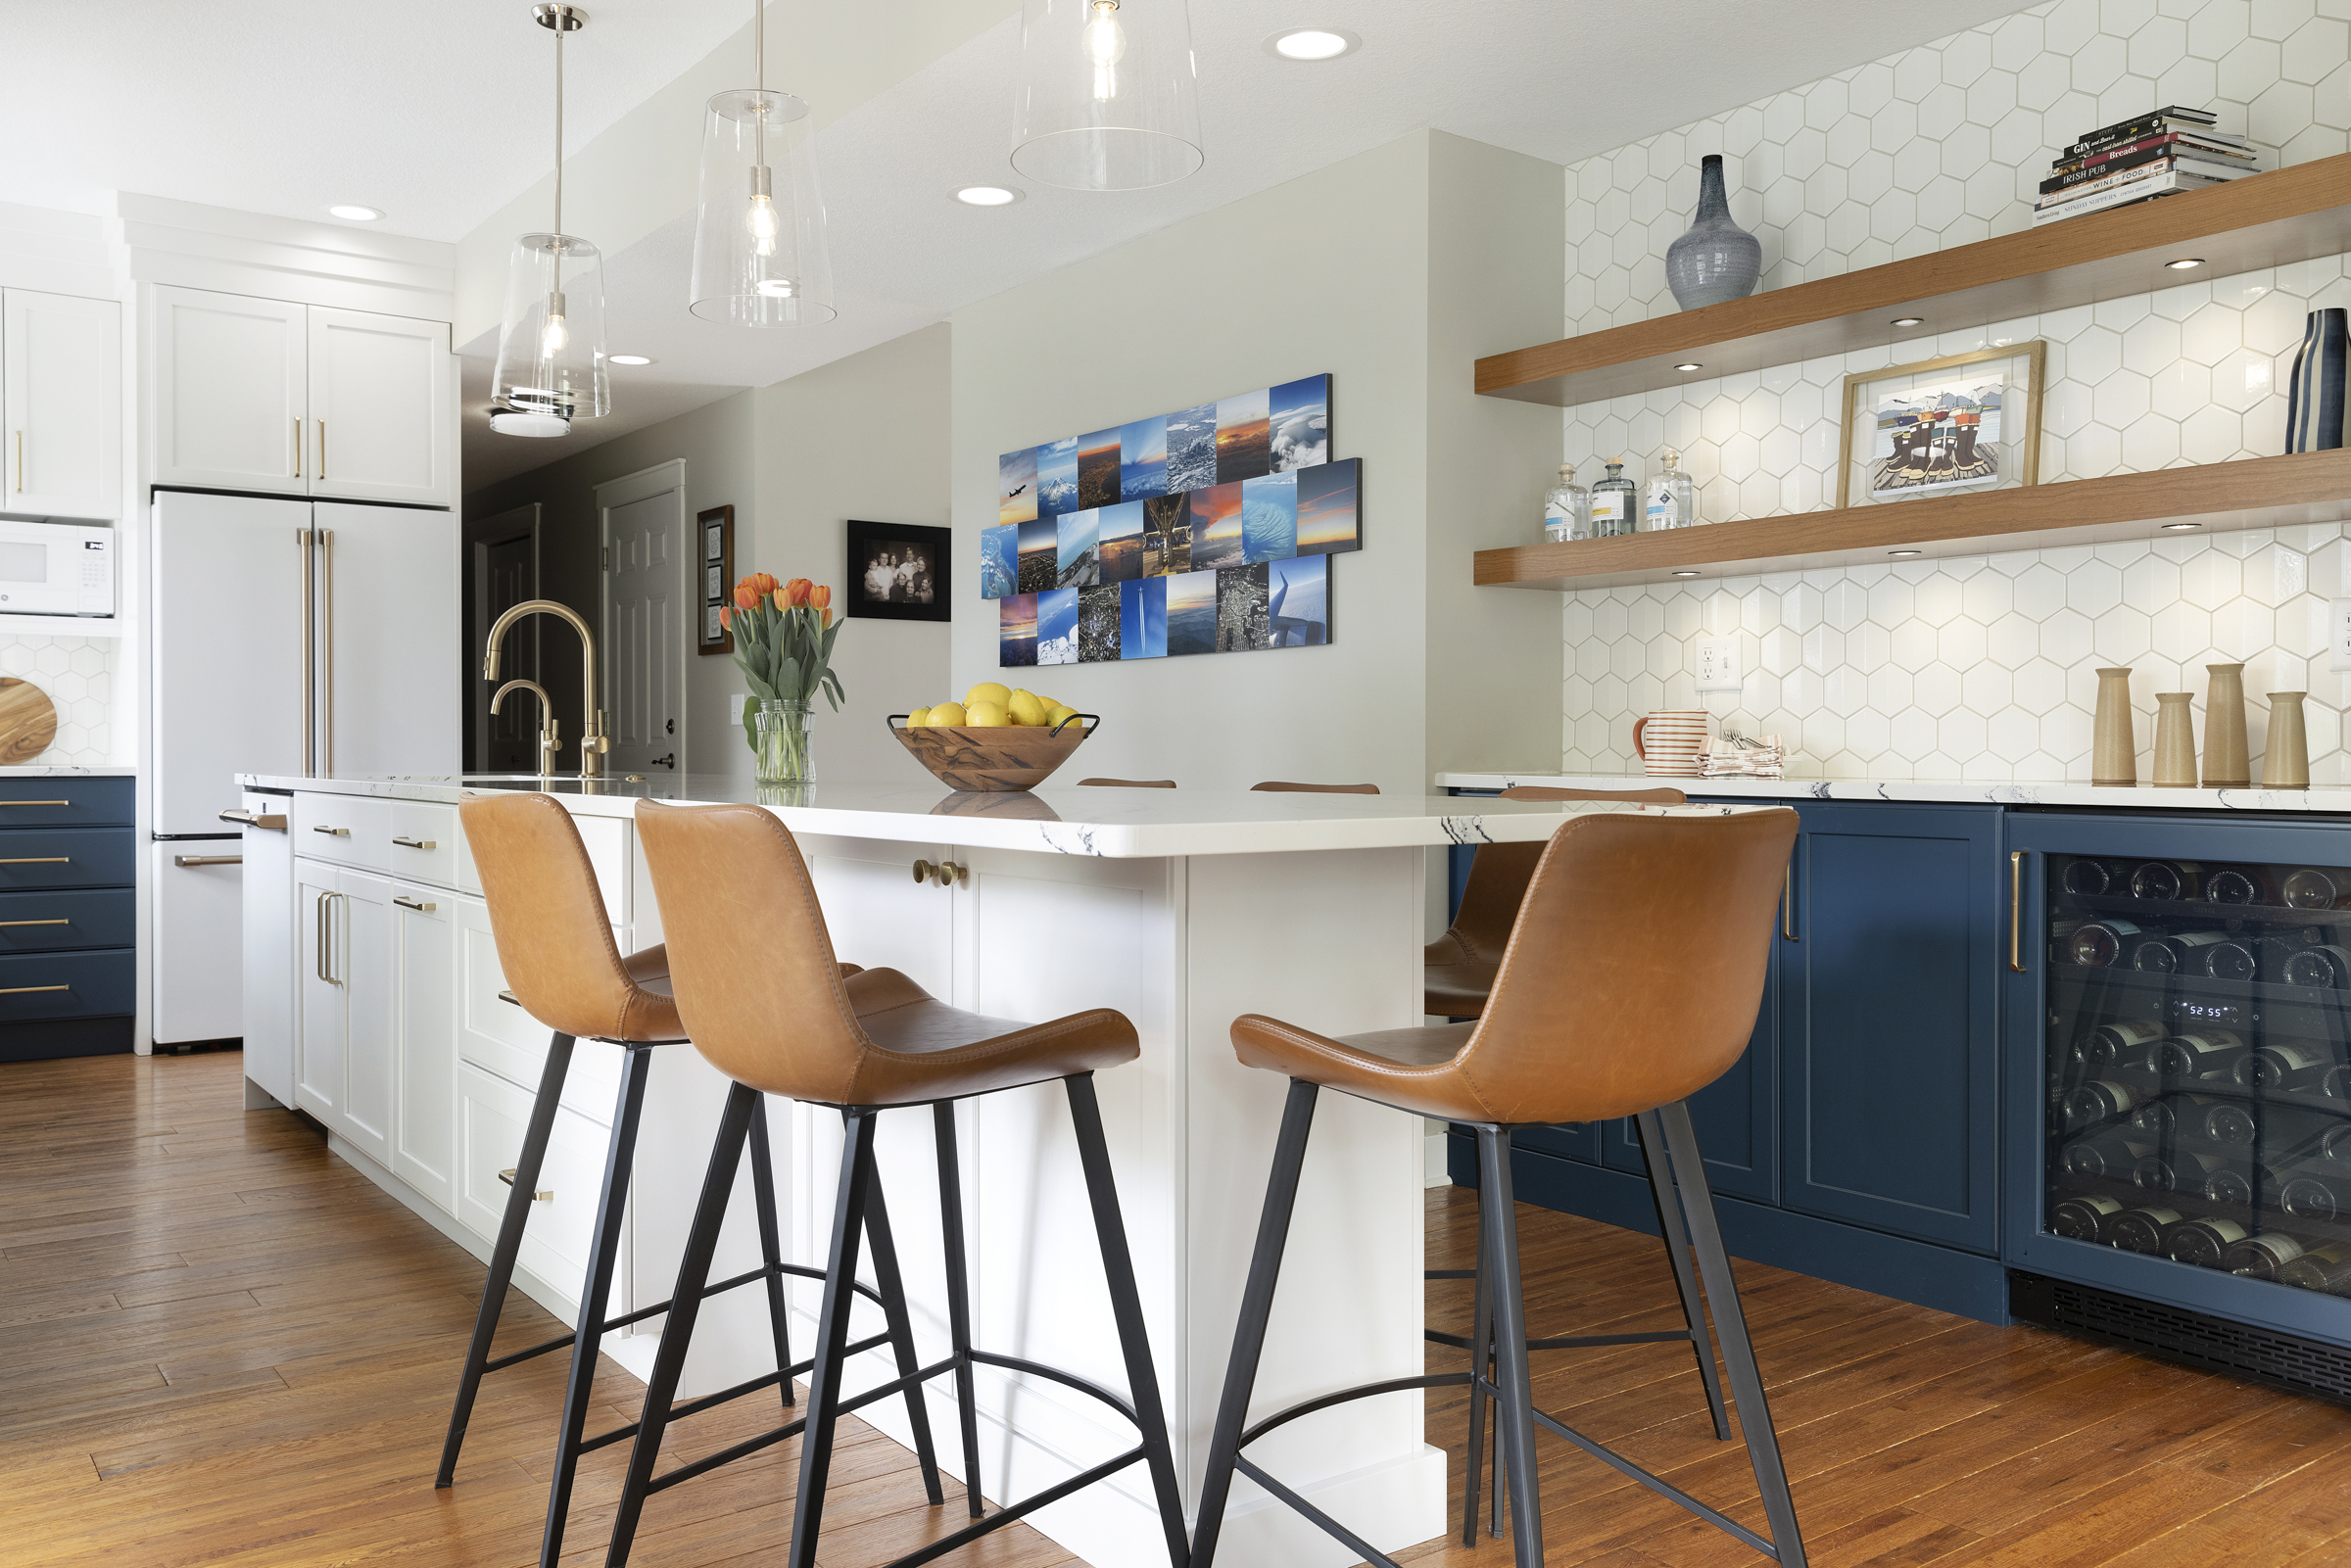 Kitchen remodel with large island with bar stools and wood floating shelves